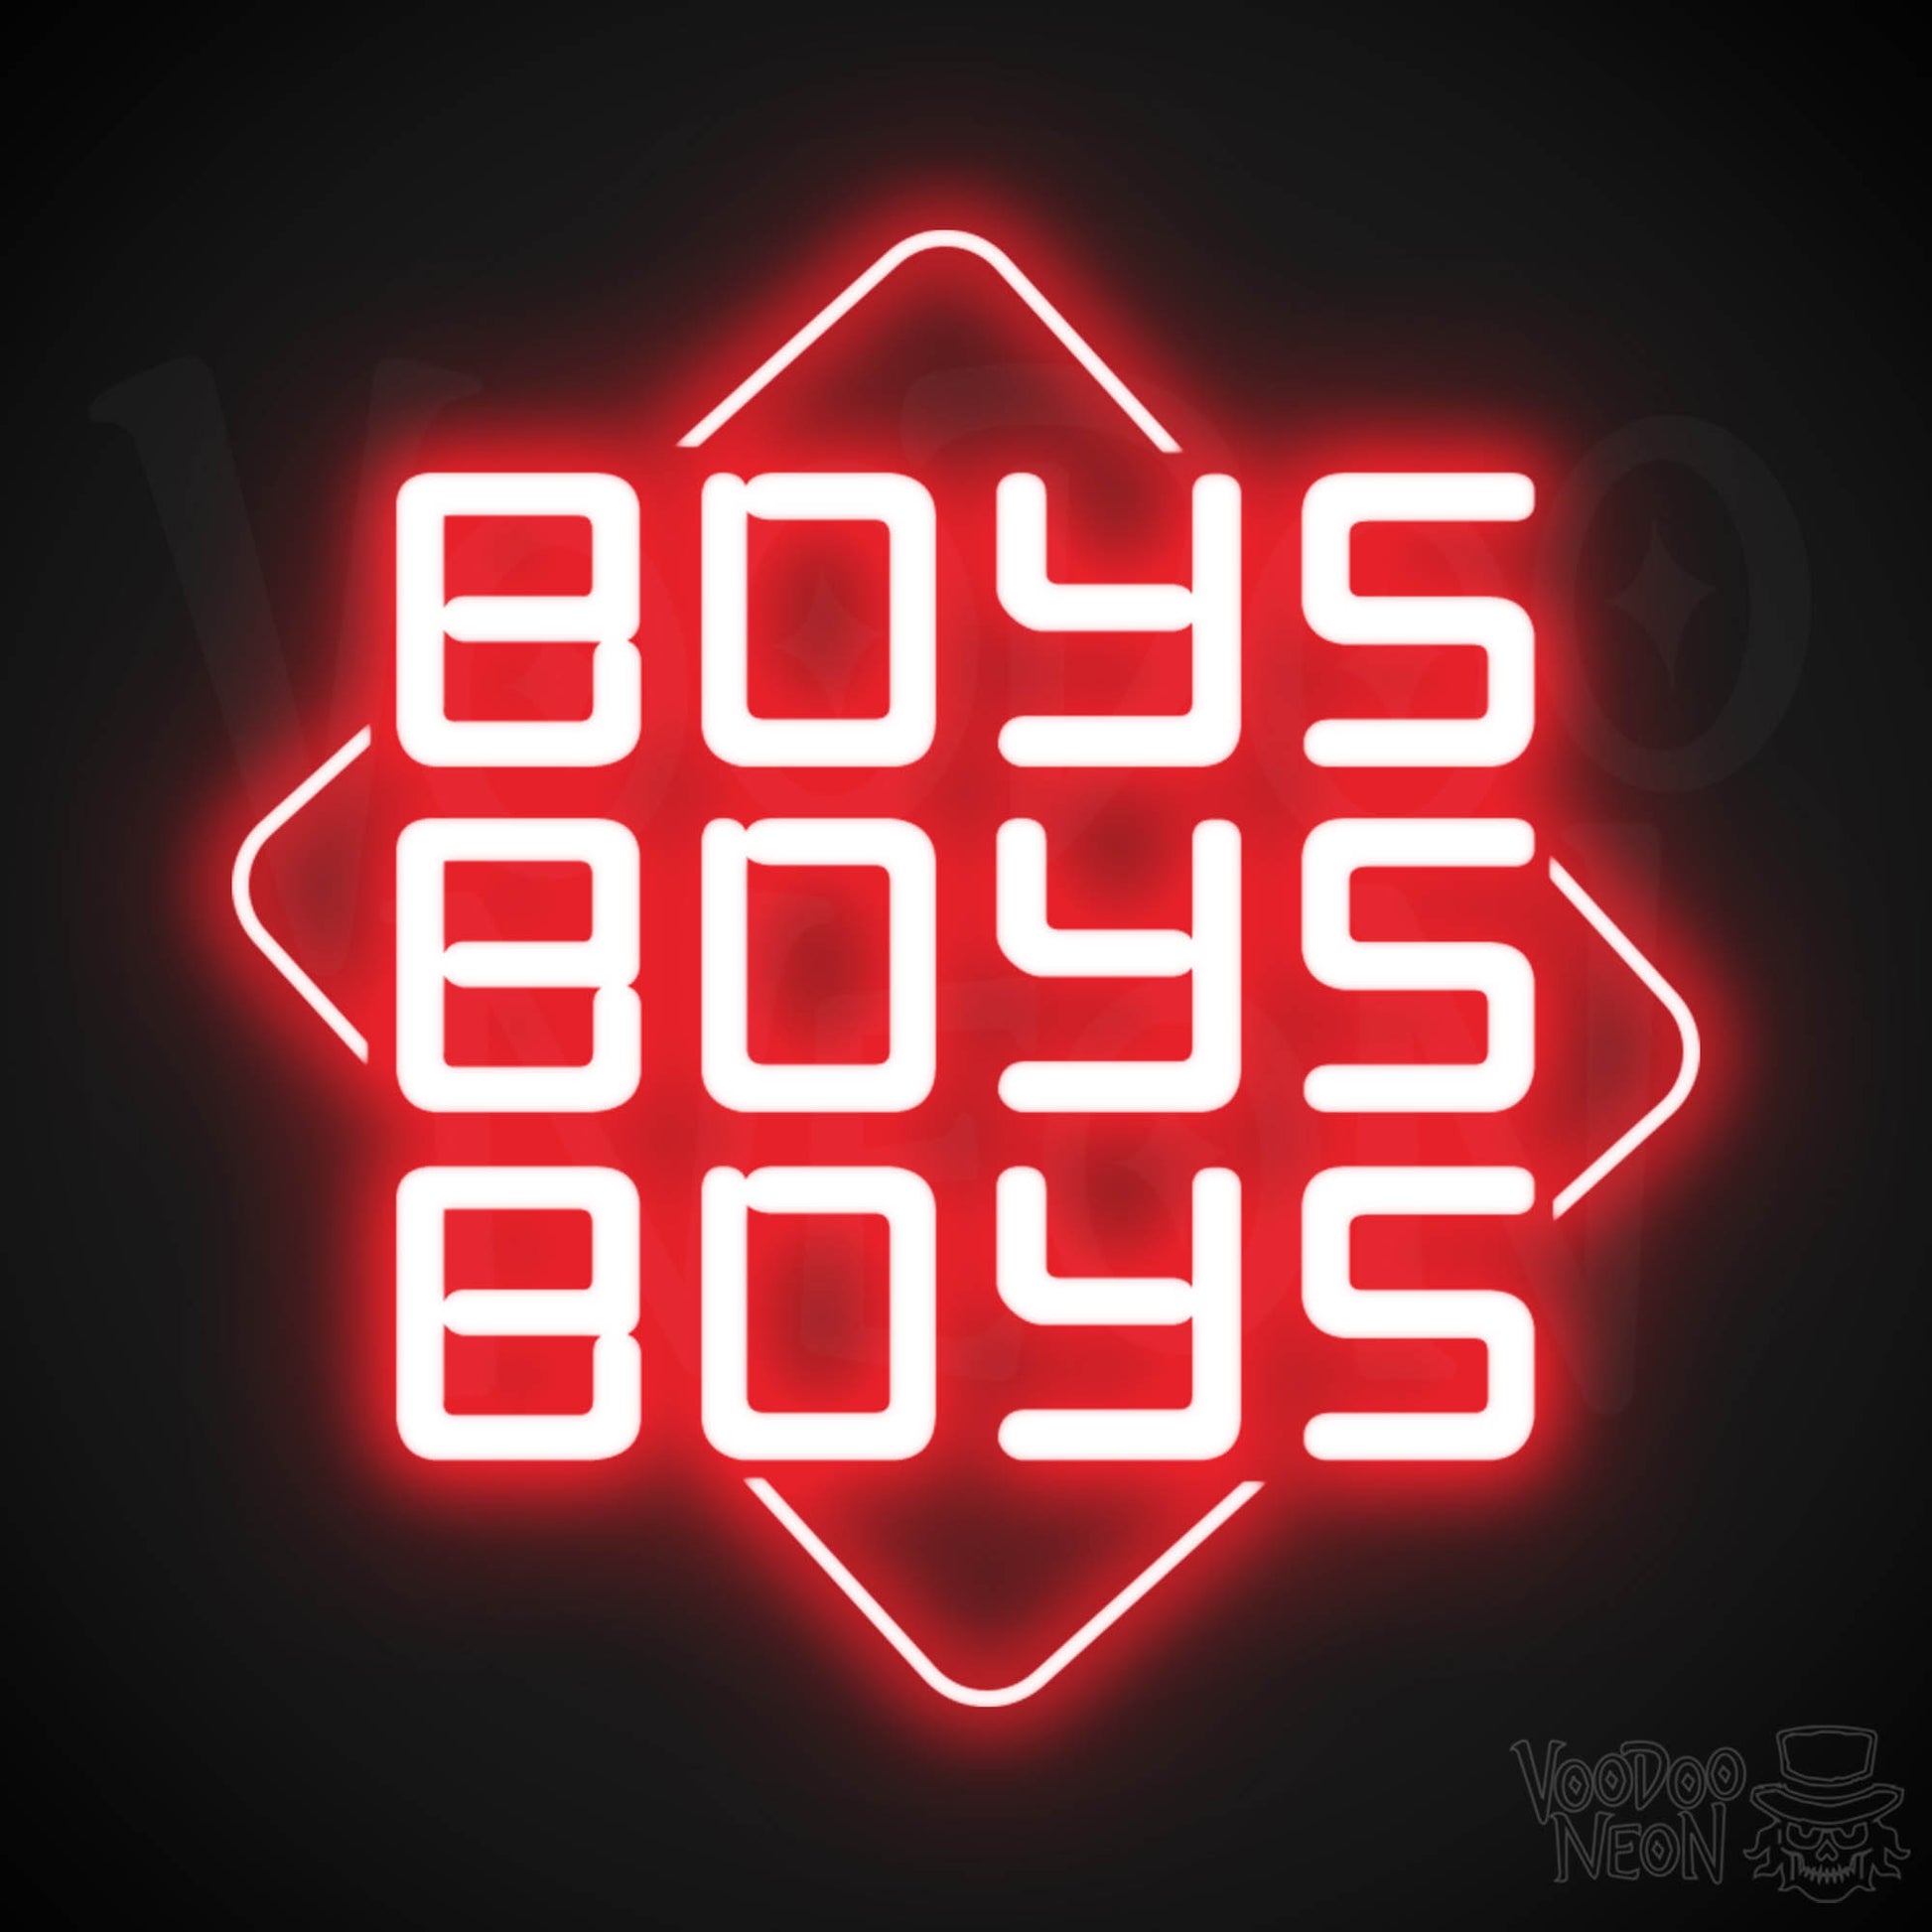 Boys Boys Boys Neon Sign - Neon Boys Boys Boys Sign - Neon Wall Art - Color Red